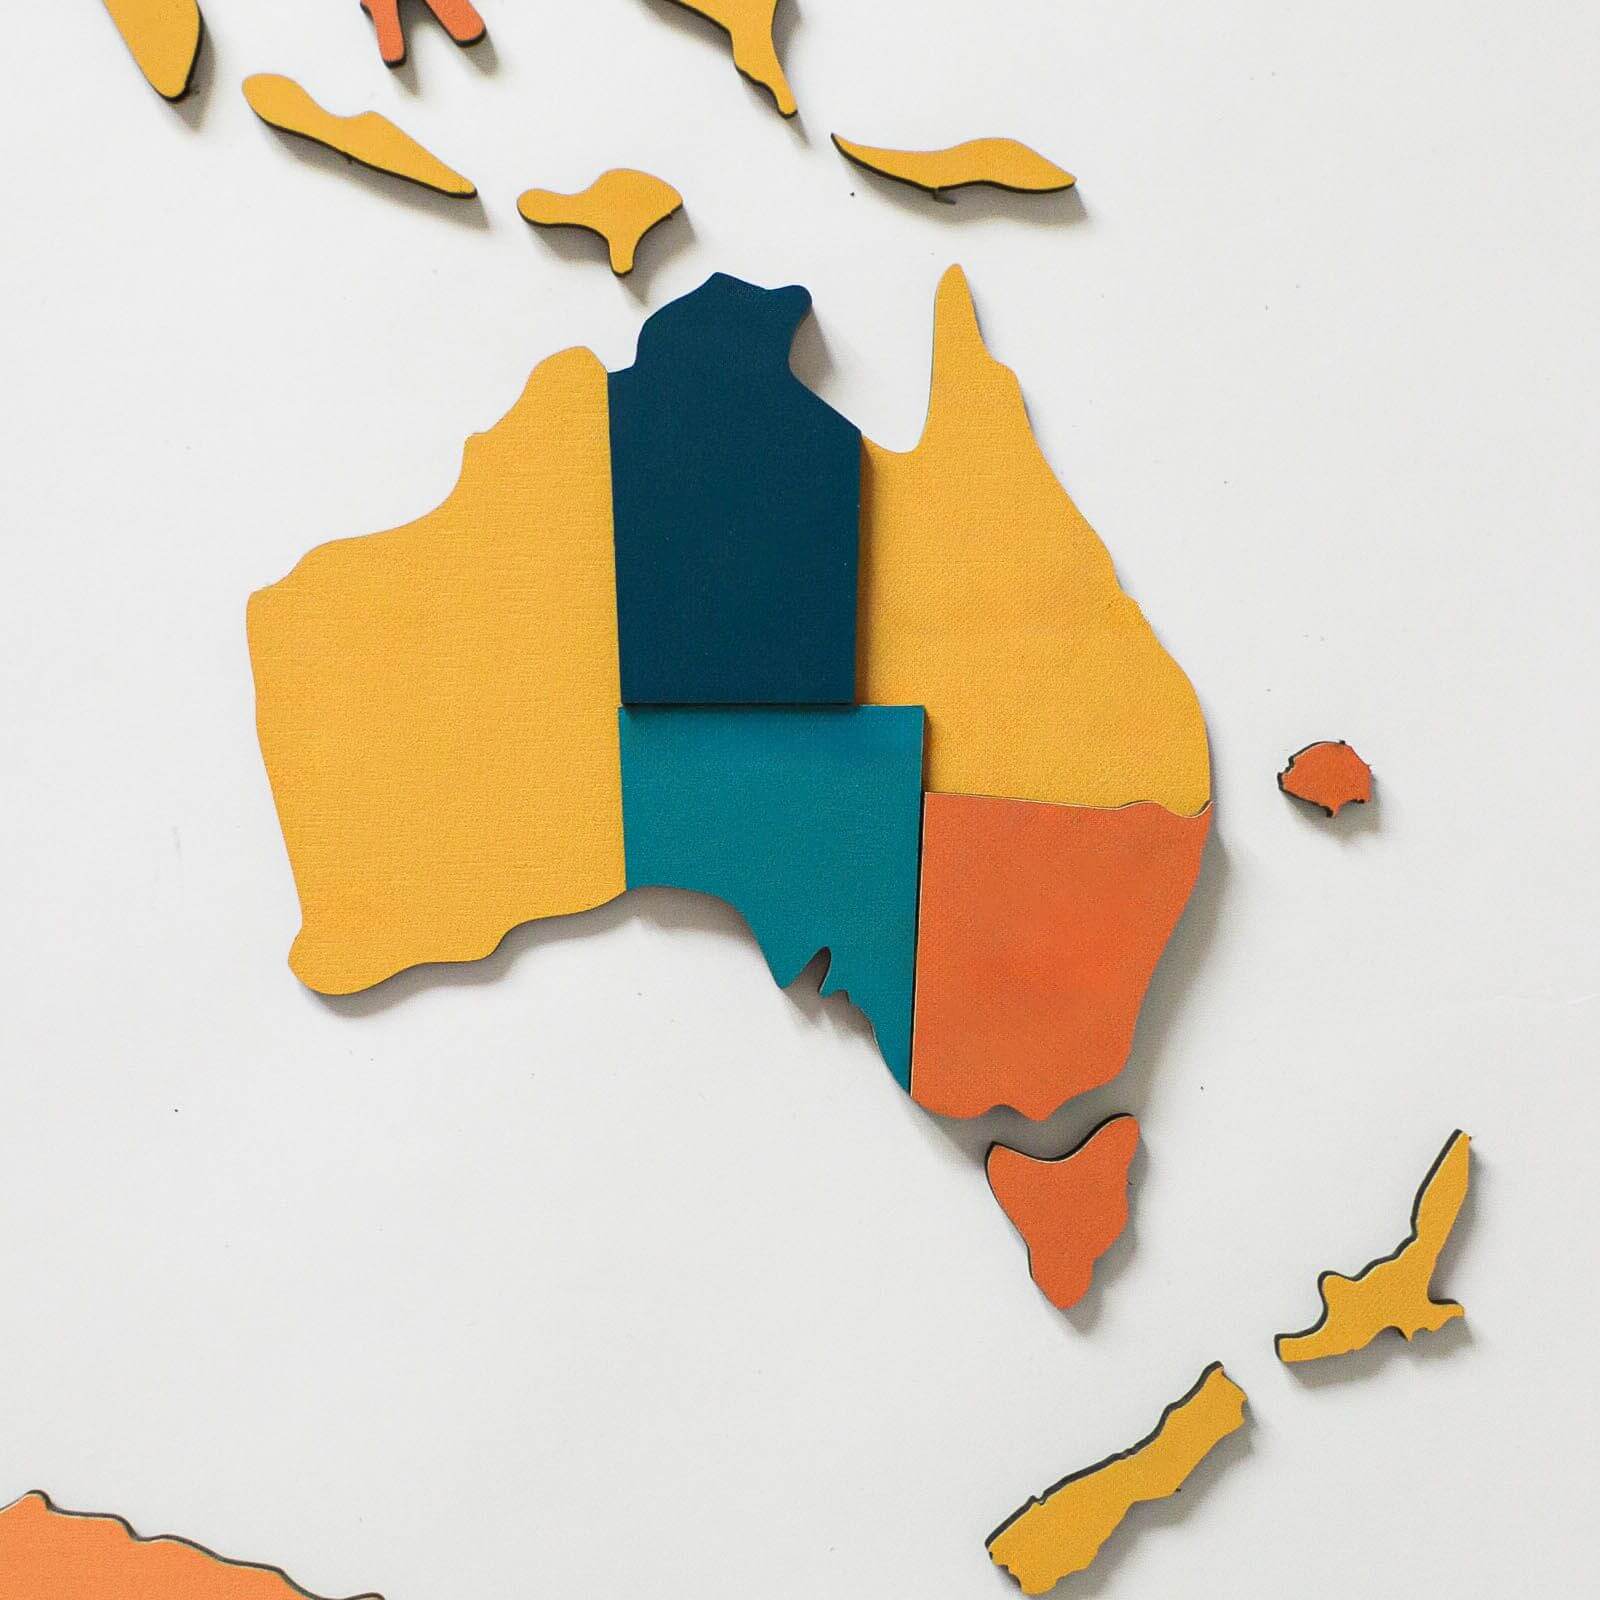 Travel, Learn and Explore With These Wooden World Maps by Enjoy The Wood